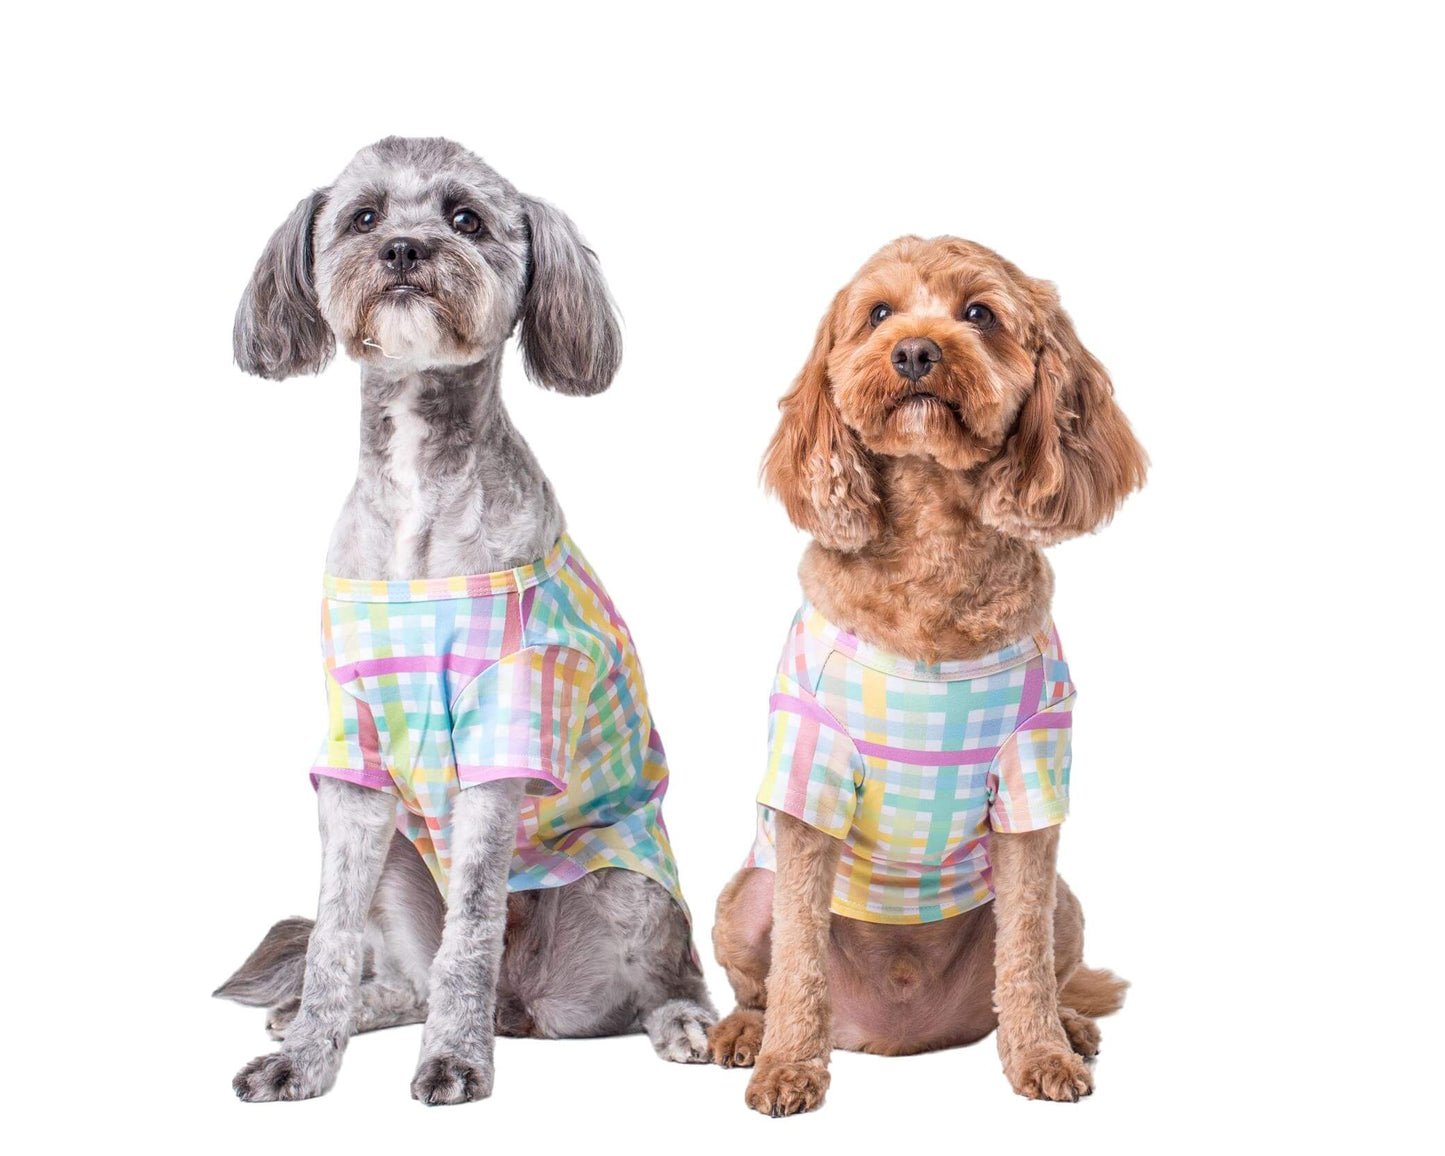 Two adorable Cavoodle dogs wearing Colour Me Gingham shirts for dogs by Vibrant Hound, featuring a vibrant rainbow color scheme - perfect dog shirts and clothing for dogs.